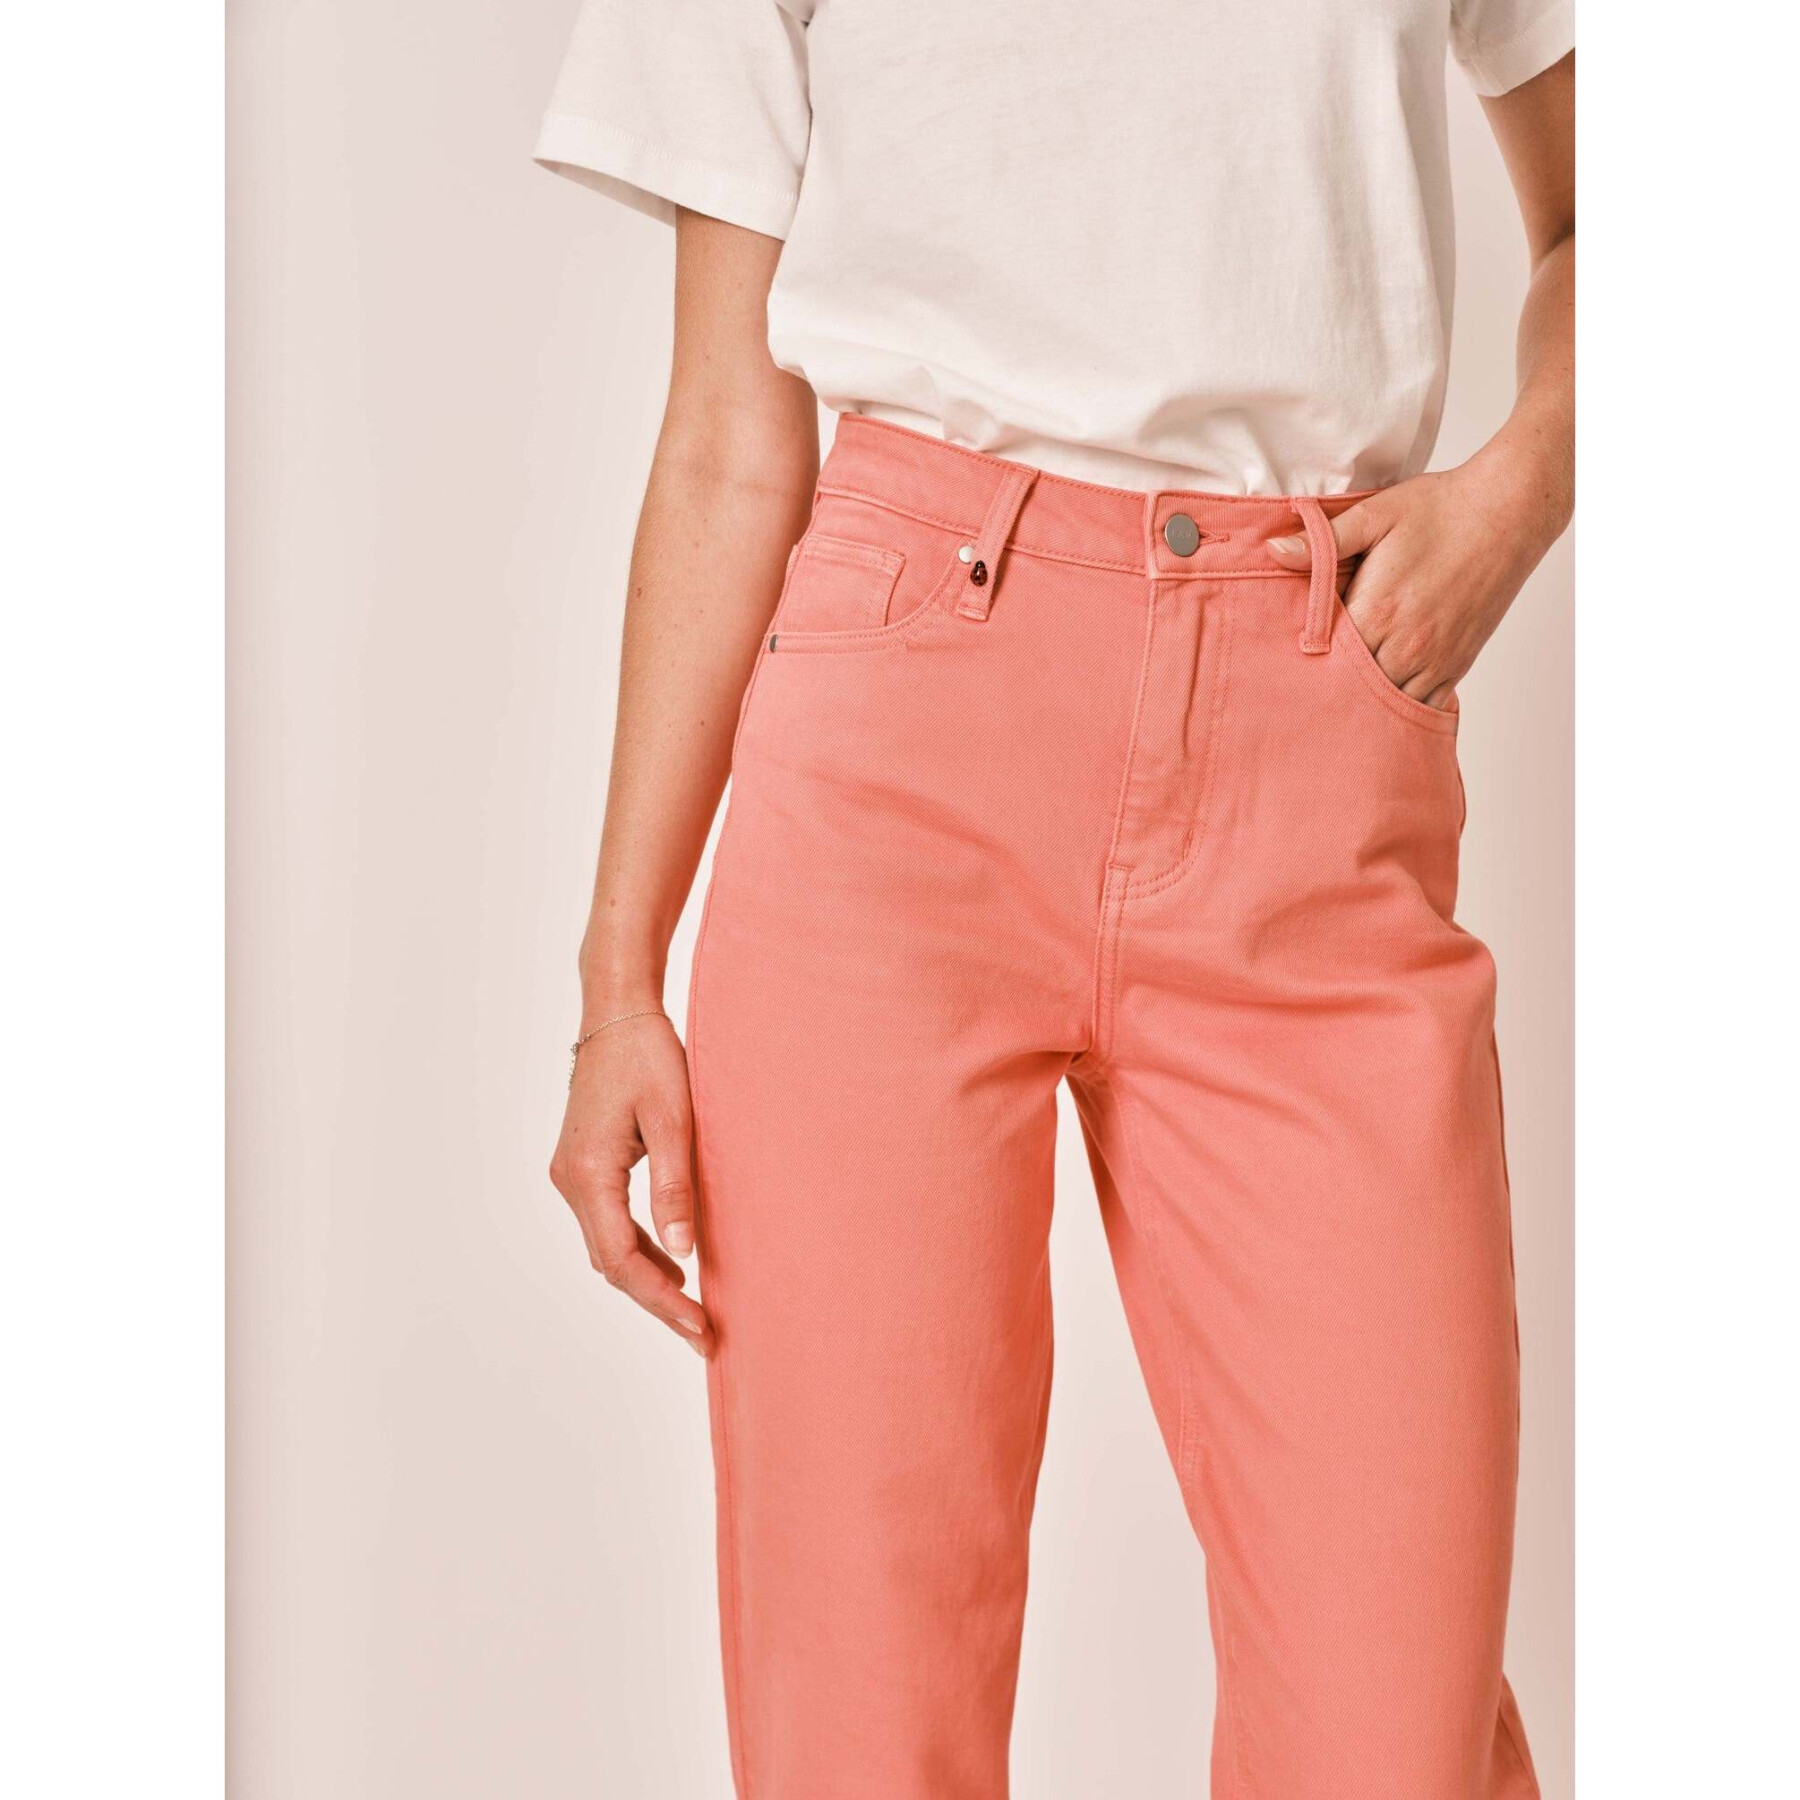 Jeans mom slim coral taille haute femme F.A.M. Paris Polly